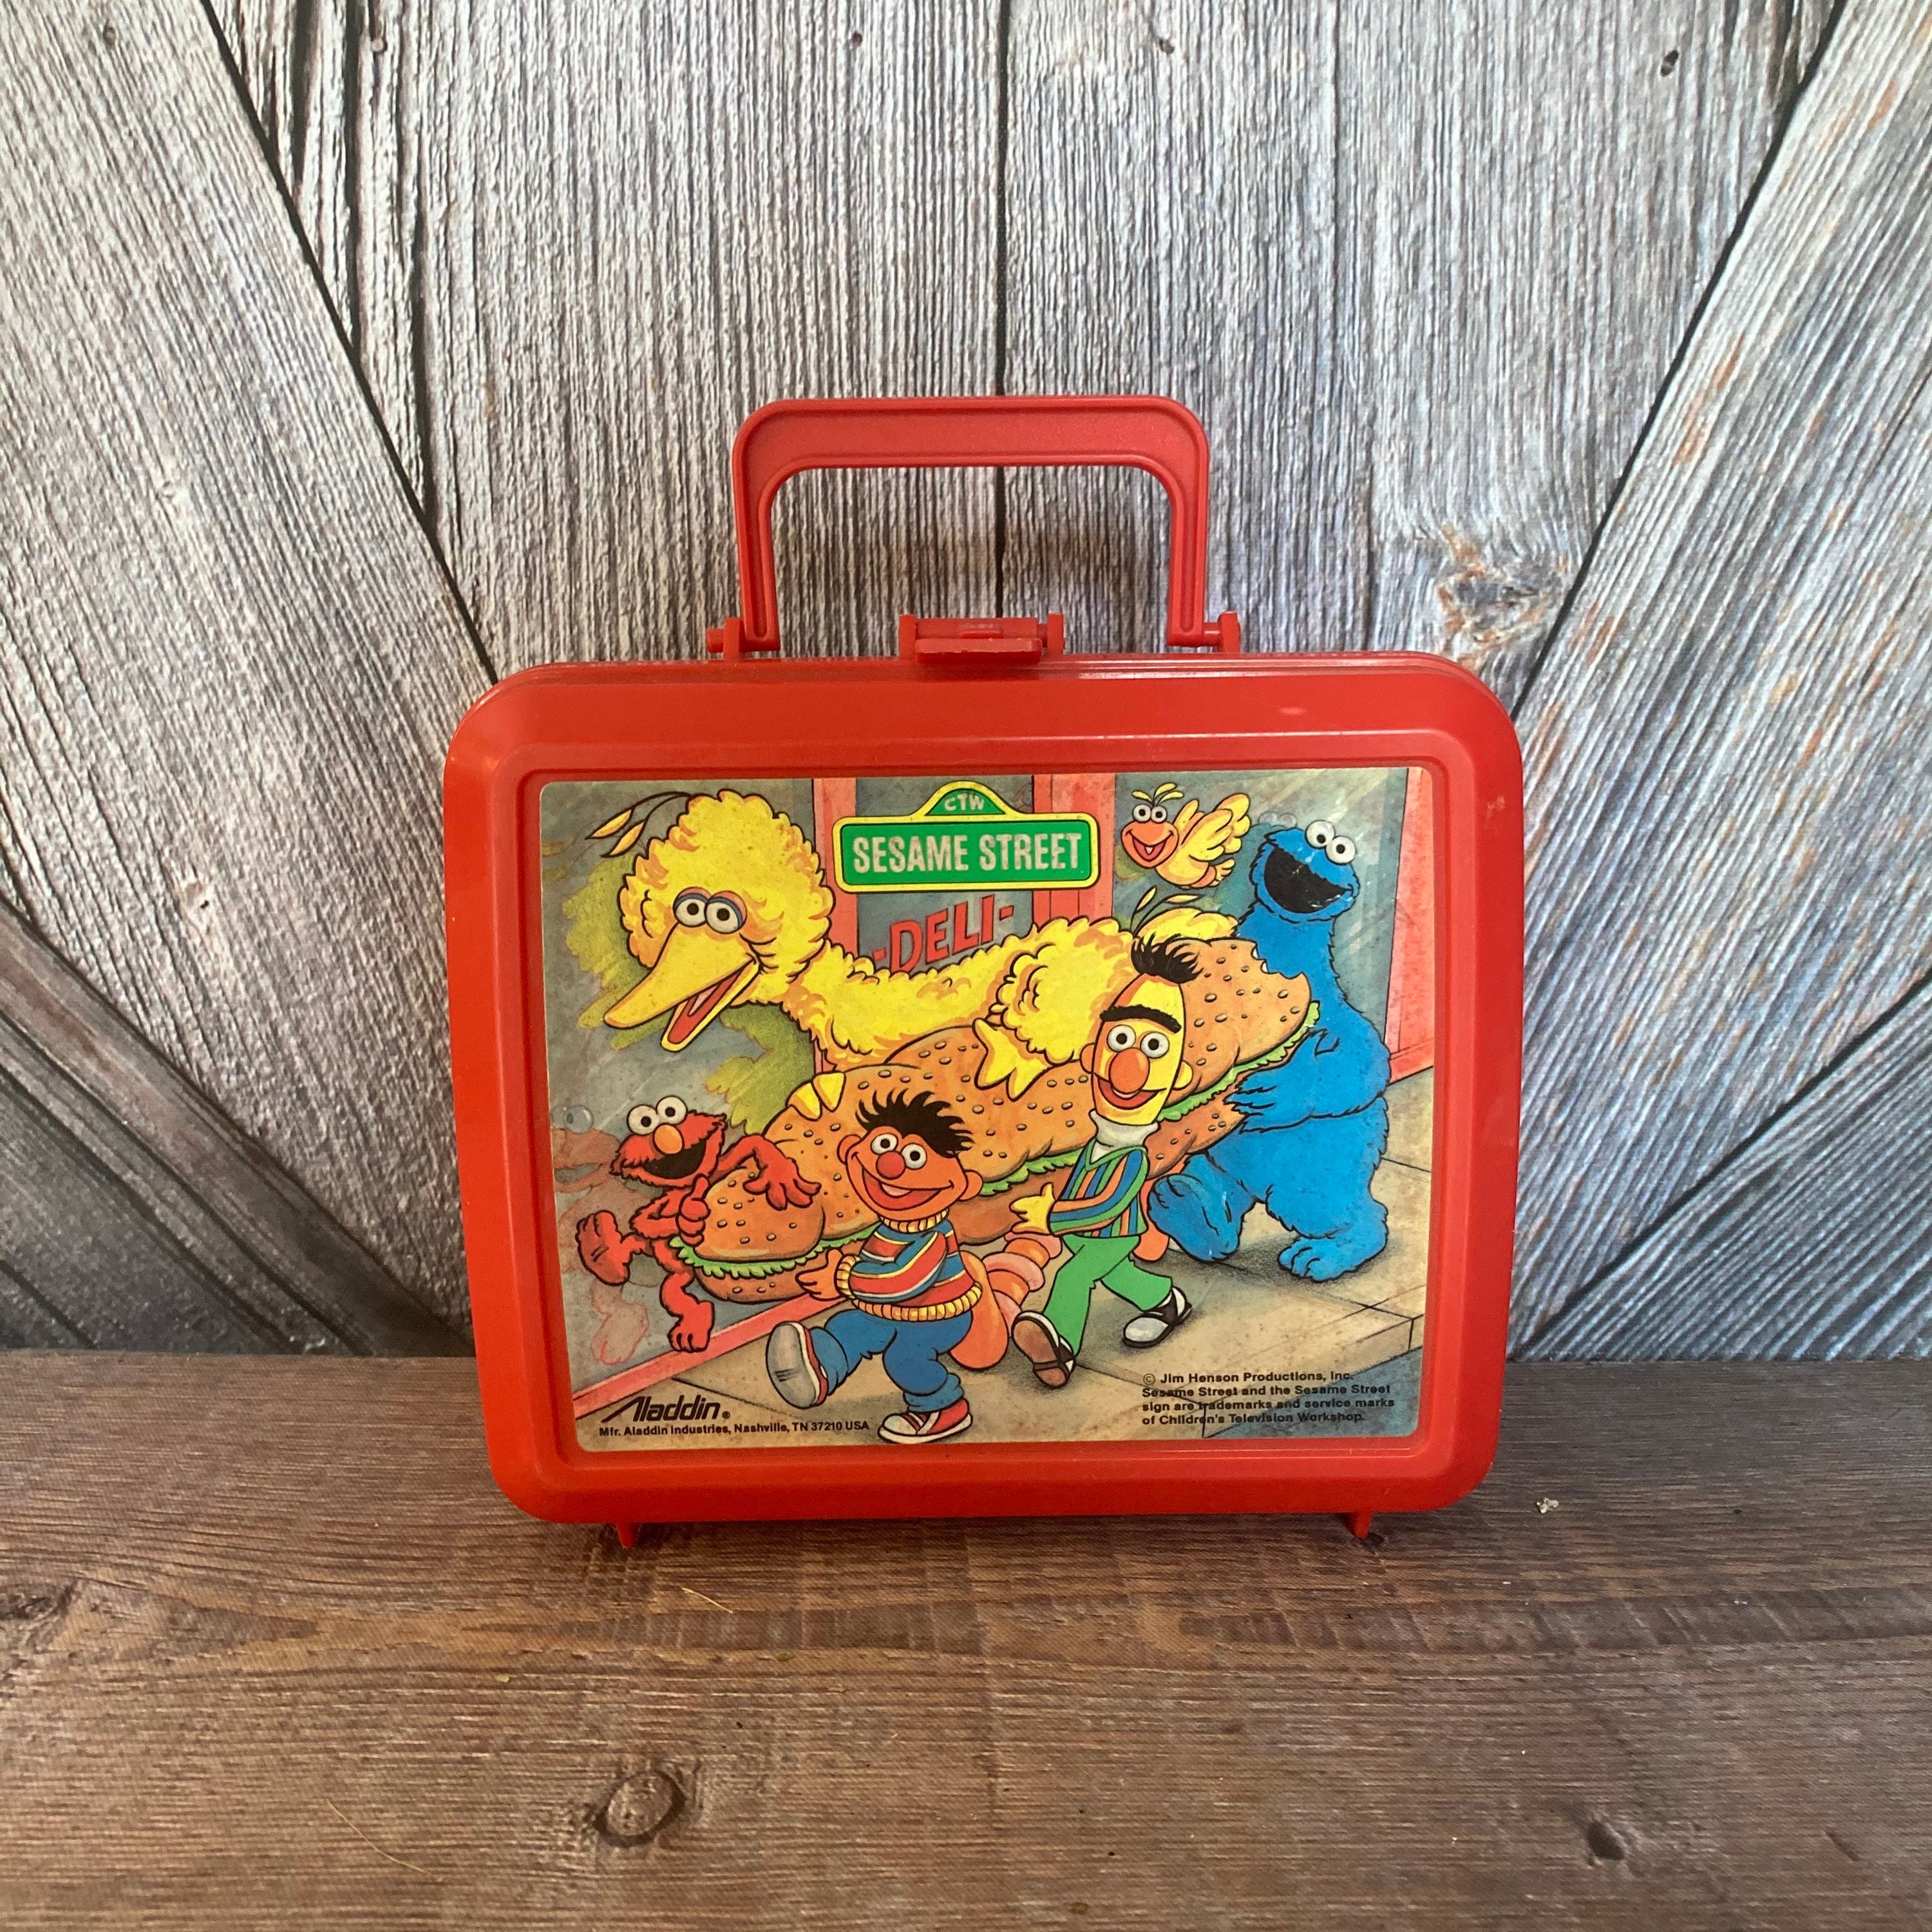 Vintage Cherry Merry Muffin Lunch Box vintage 80's Plastic Lunch